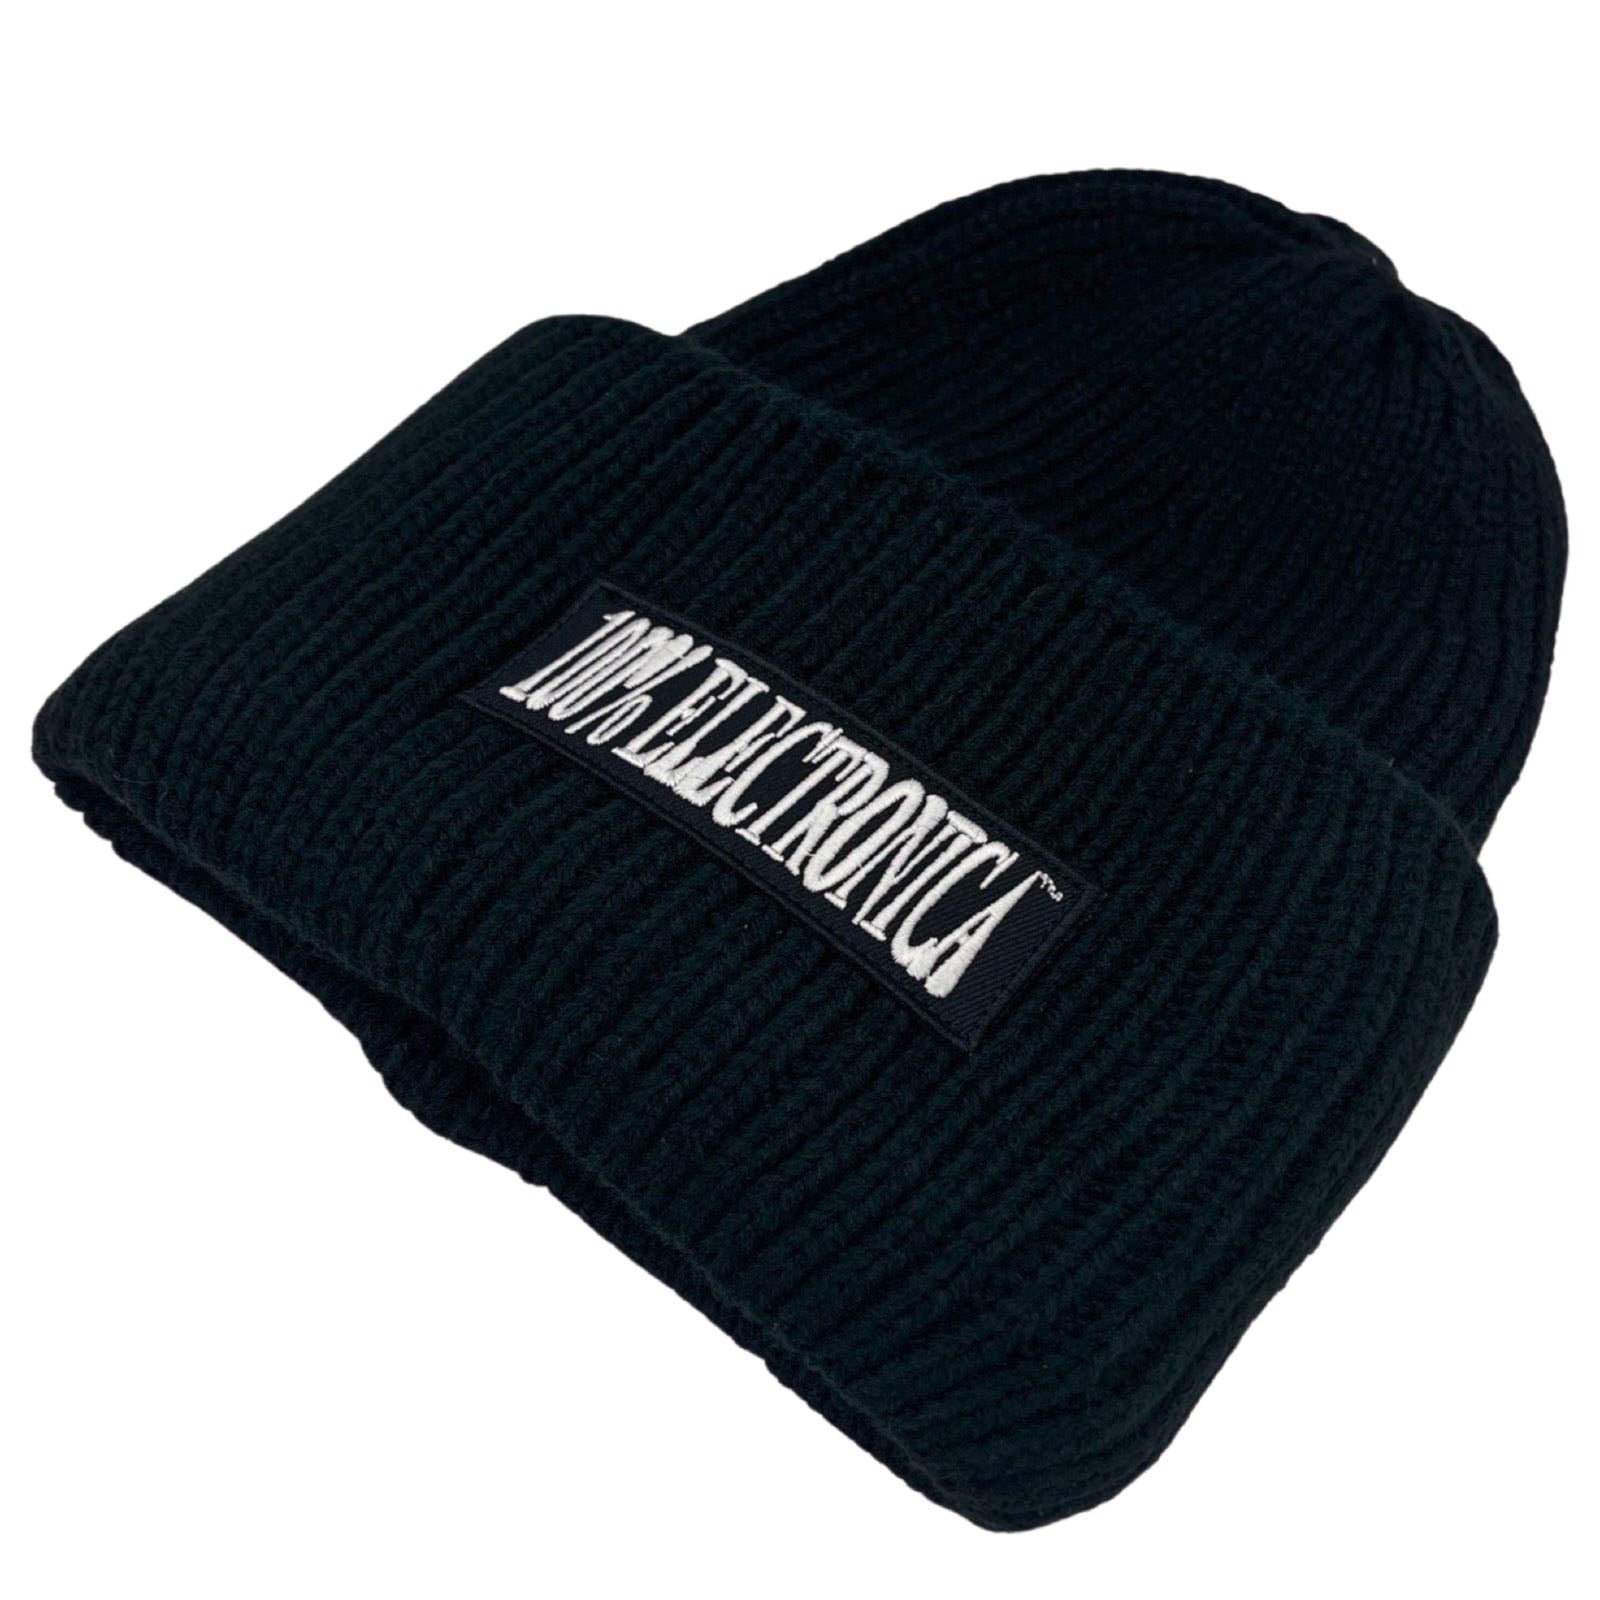 100% Electronica - Logo BIG Beanie (Black) - 100% Electronica Official Store (Photo 4)